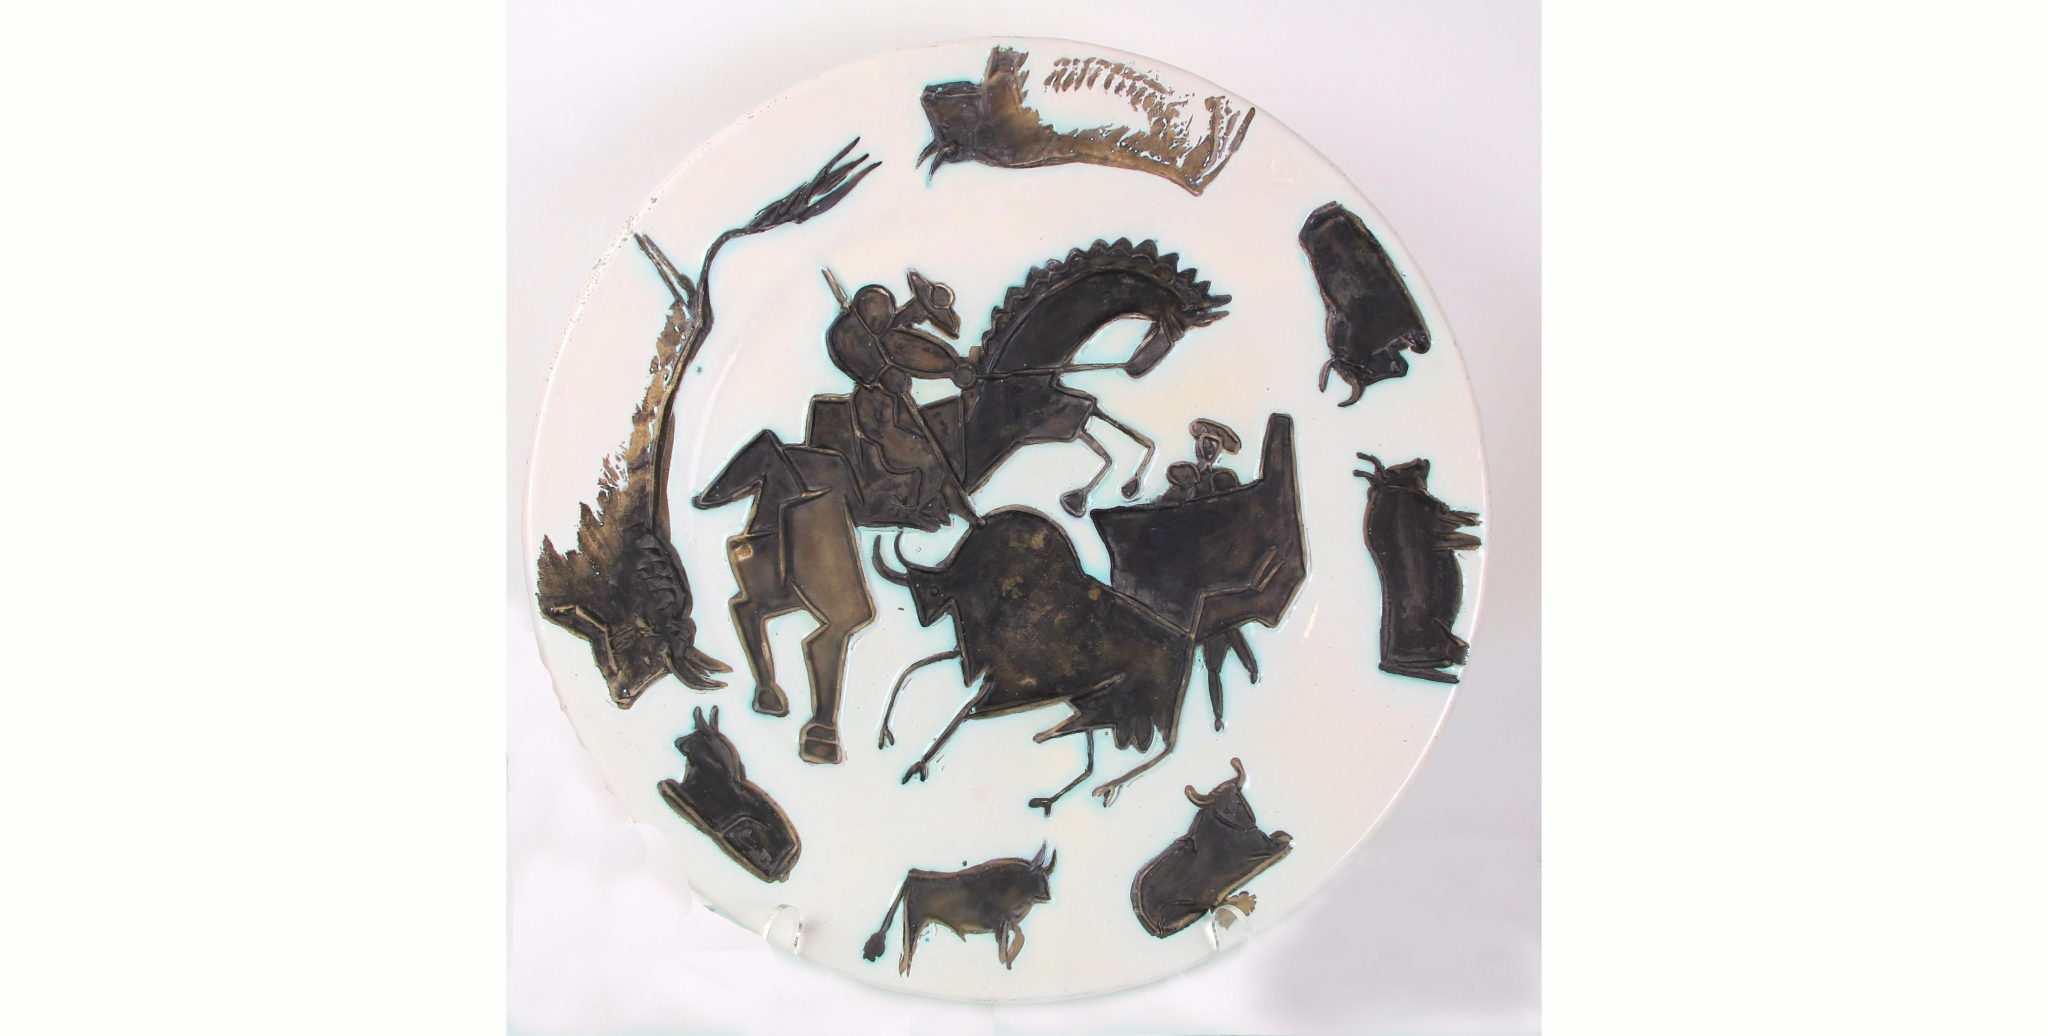 A plate with animals on it and some of the animal 's names.